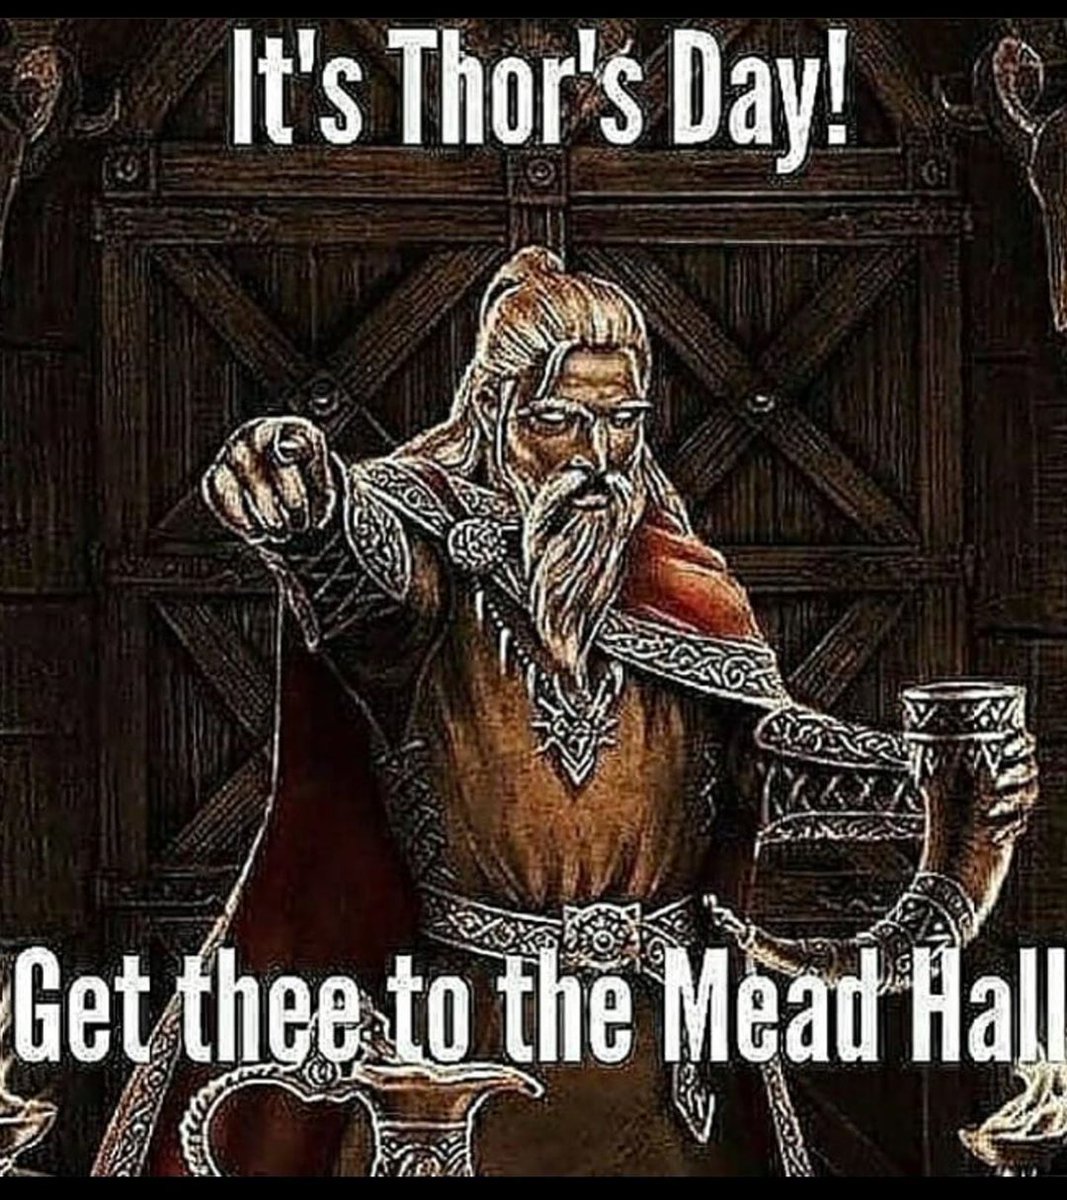 RT @YungShitgrinder: Bring your favourite drinking horn, because Thor's day has arrived!!! https://t.co/pQ1d6rlMFM